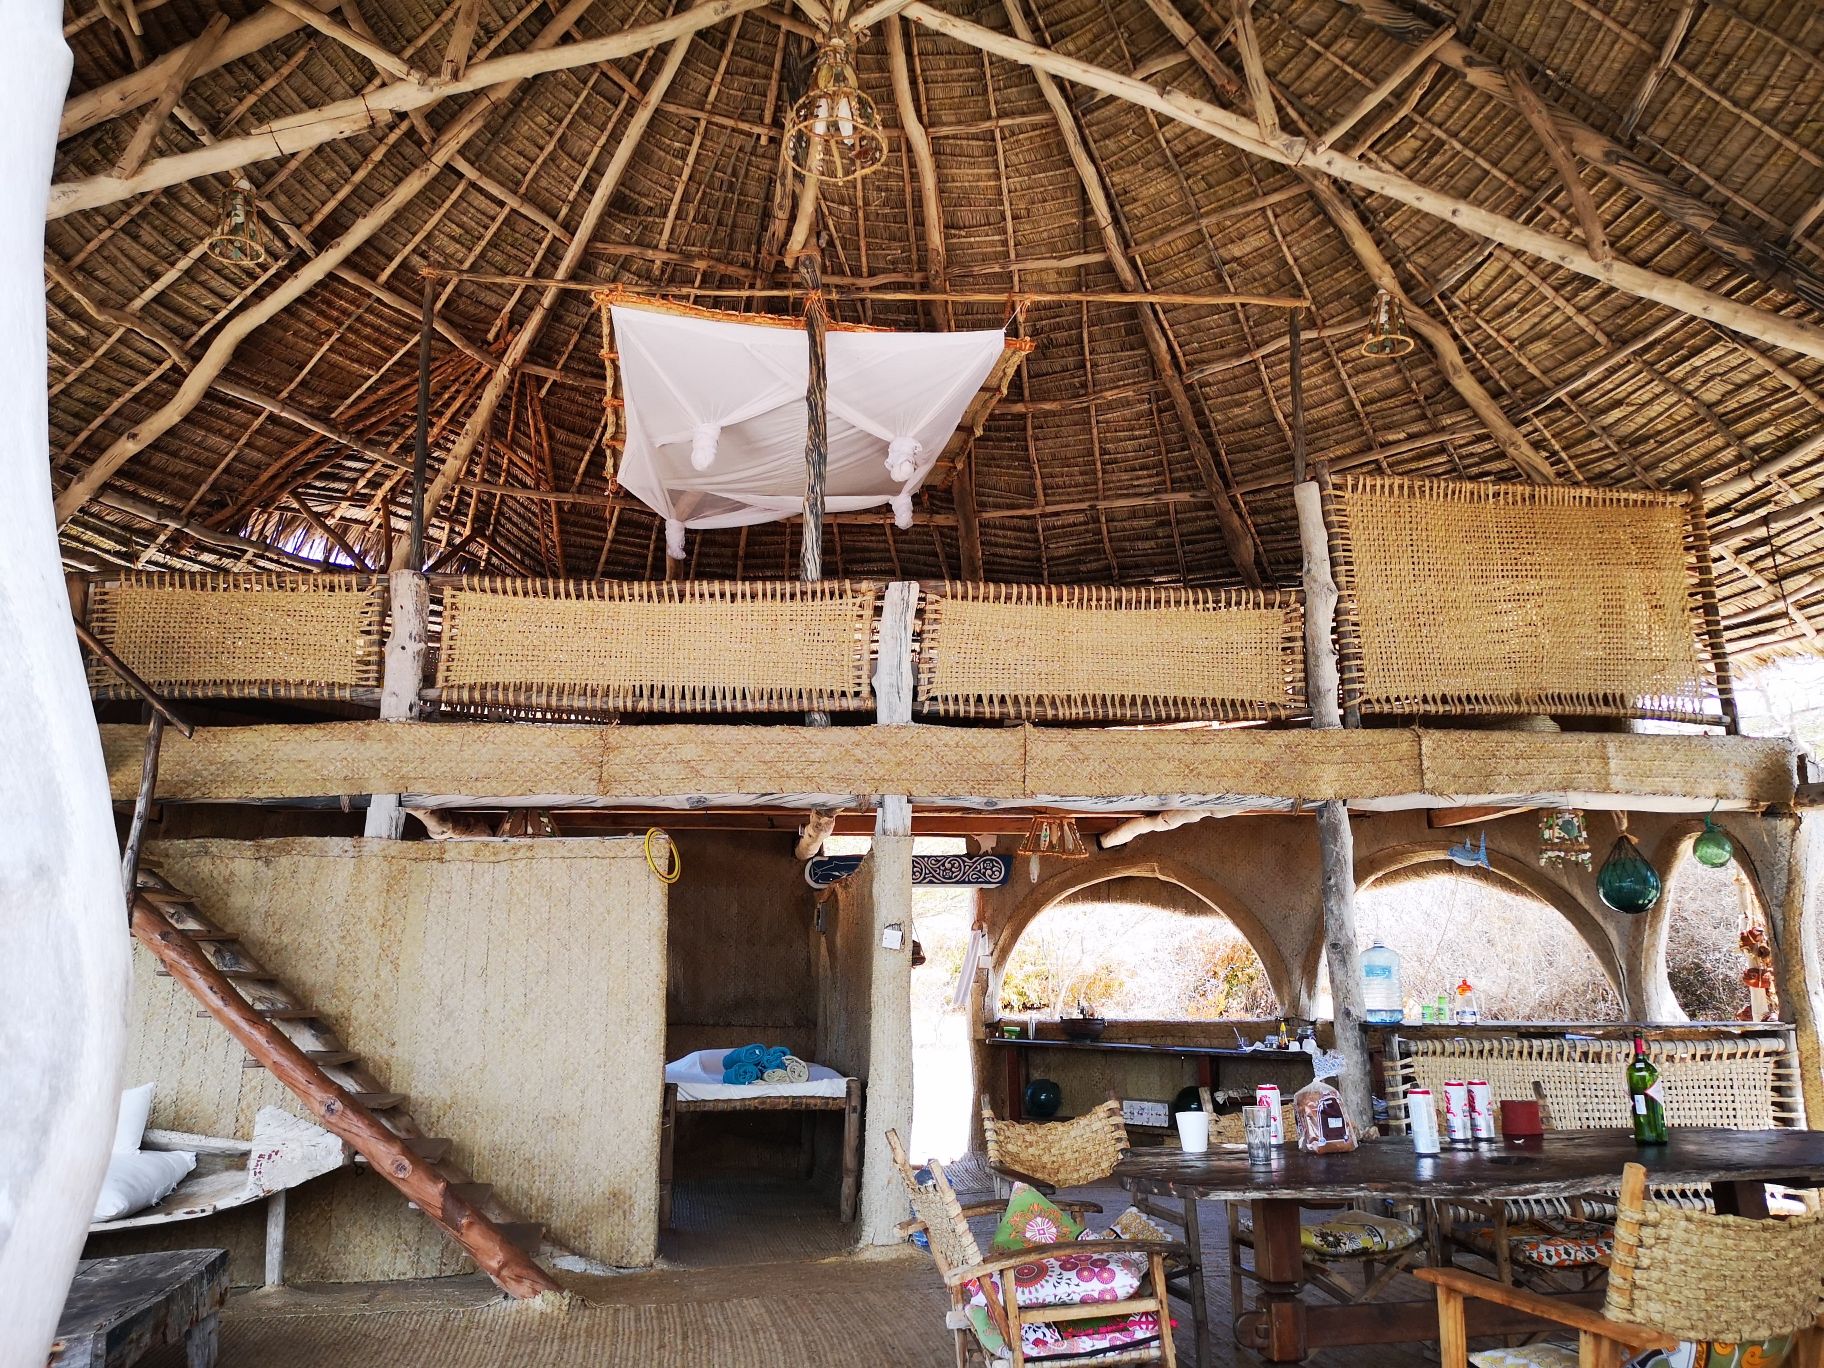 Inspirational places for Digital Nomads in Africa